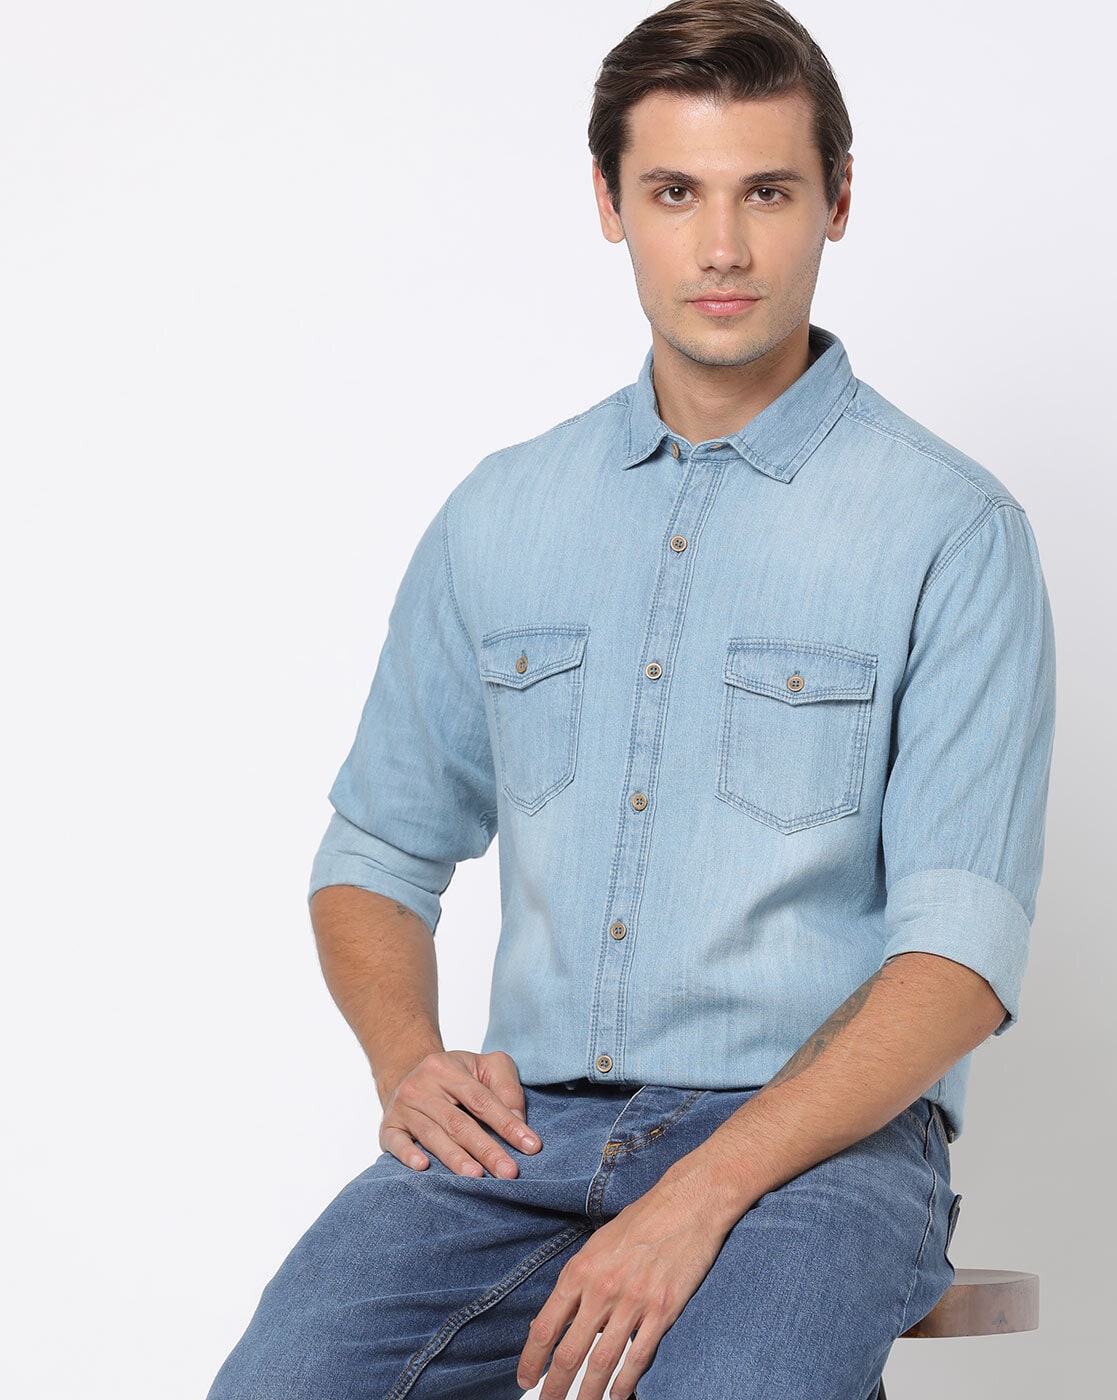 Buy Denim Shirts For Men Online In India At Lowest Prices | Tata CLiQ